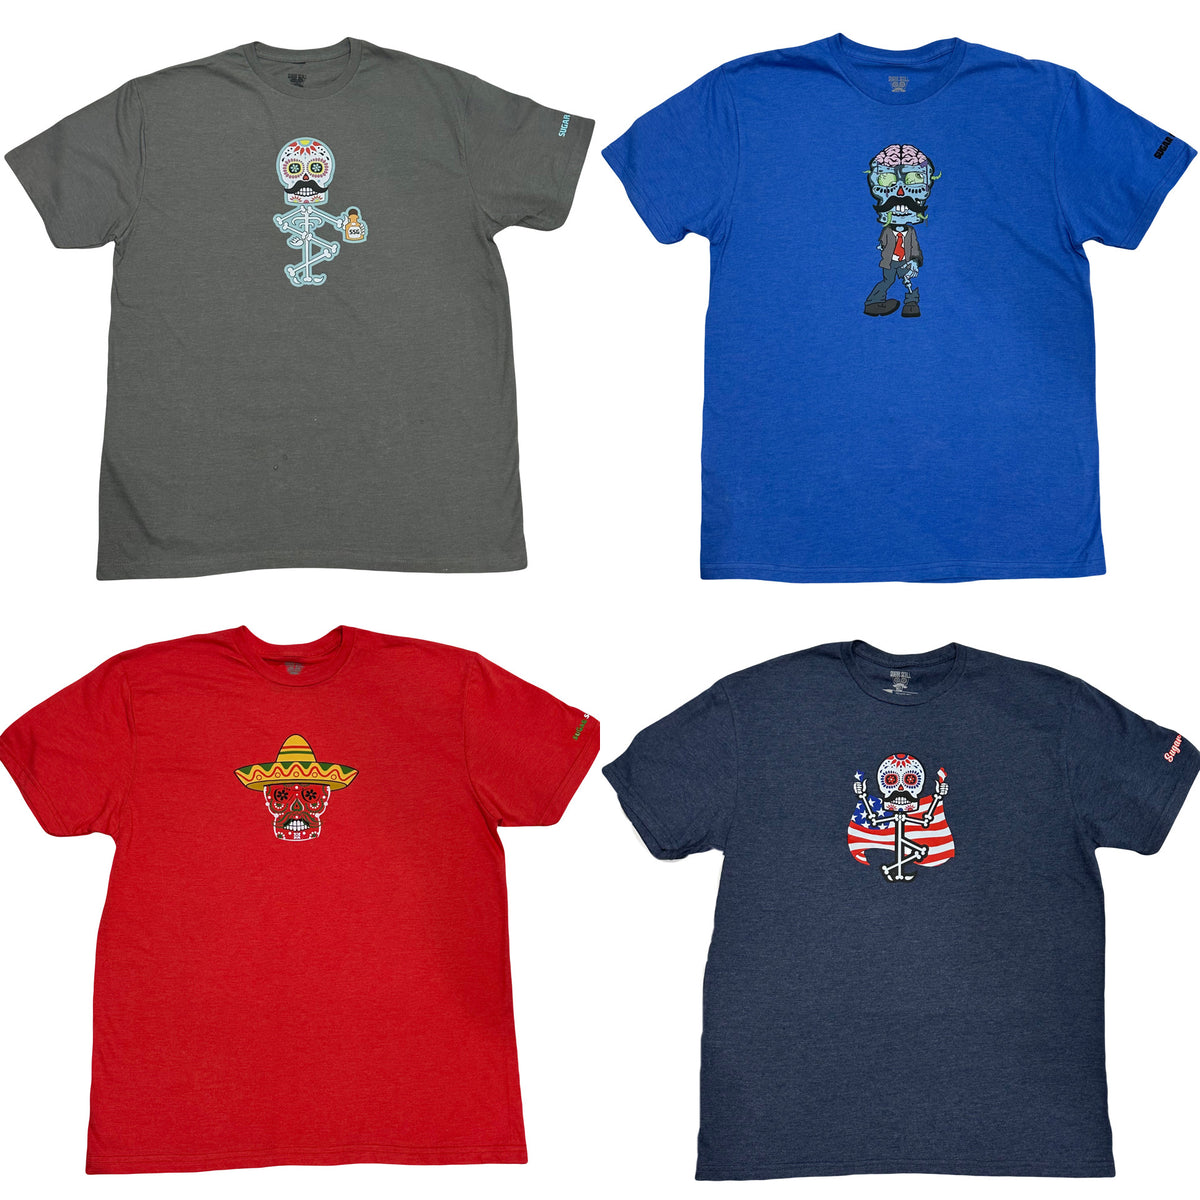 Click Skull – Sugar T-Shirt Golf Collection: Here